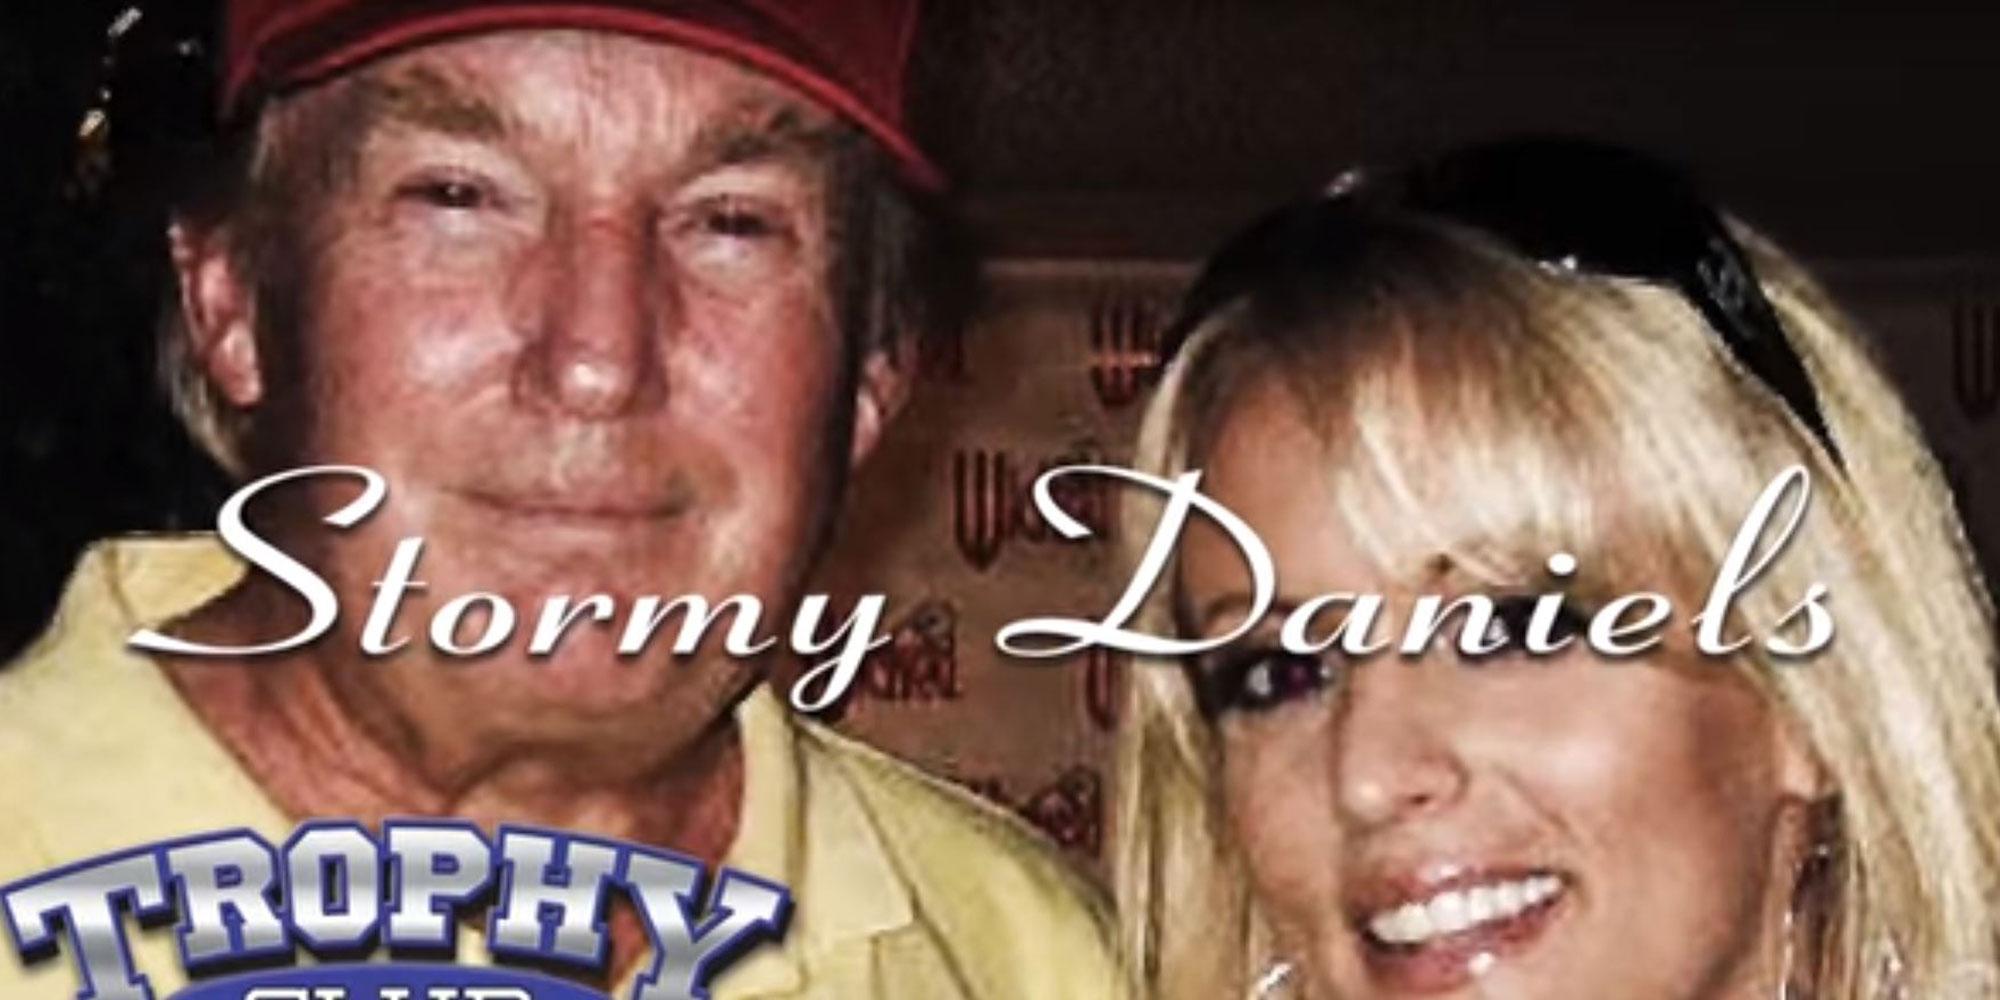 Stormy Daniels Denies Having Affair With Donald Trump In Statement It